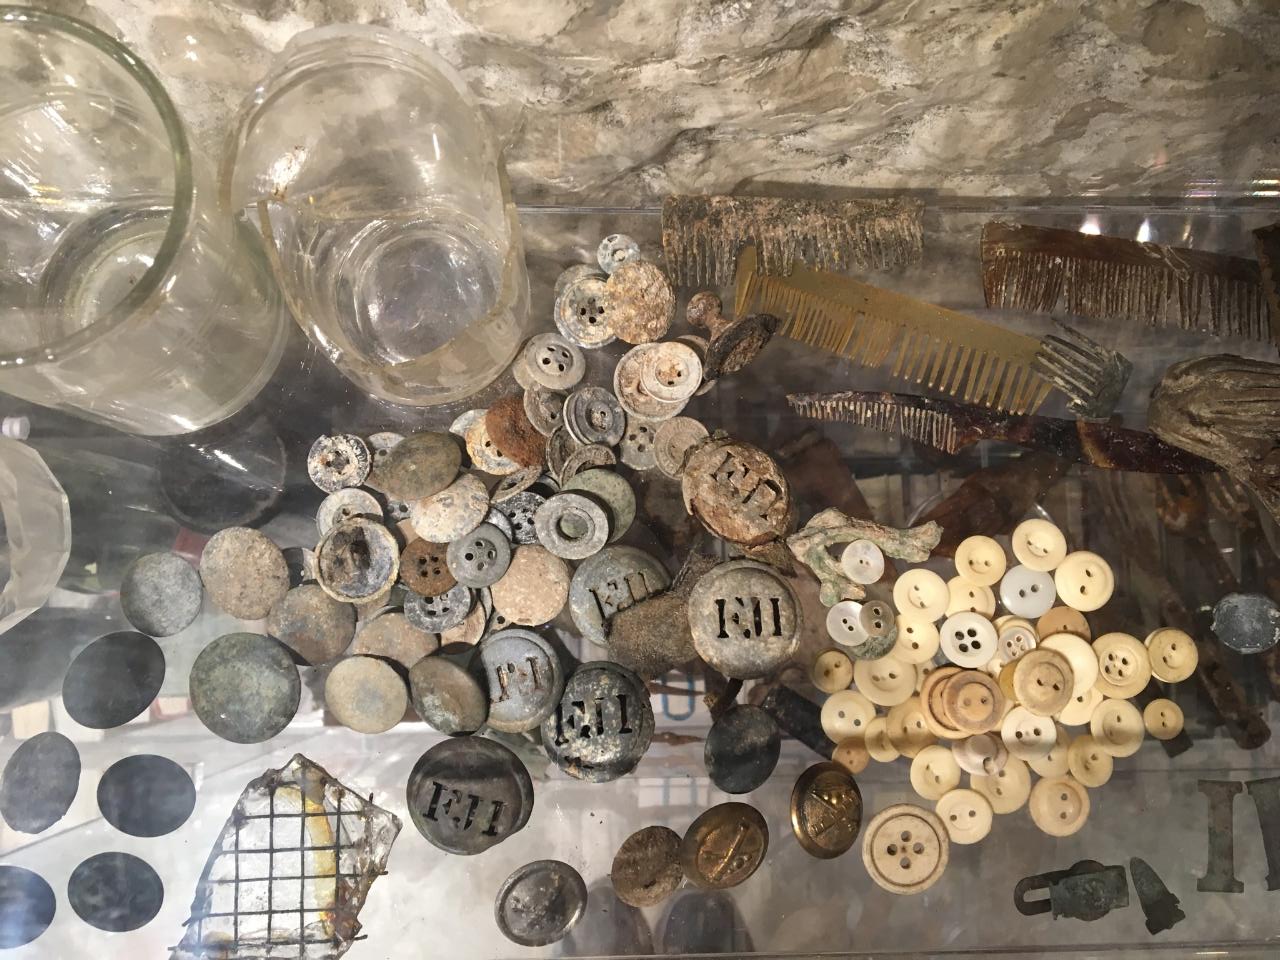 Antique buttons, coins, glass cups and combs in a museum display.